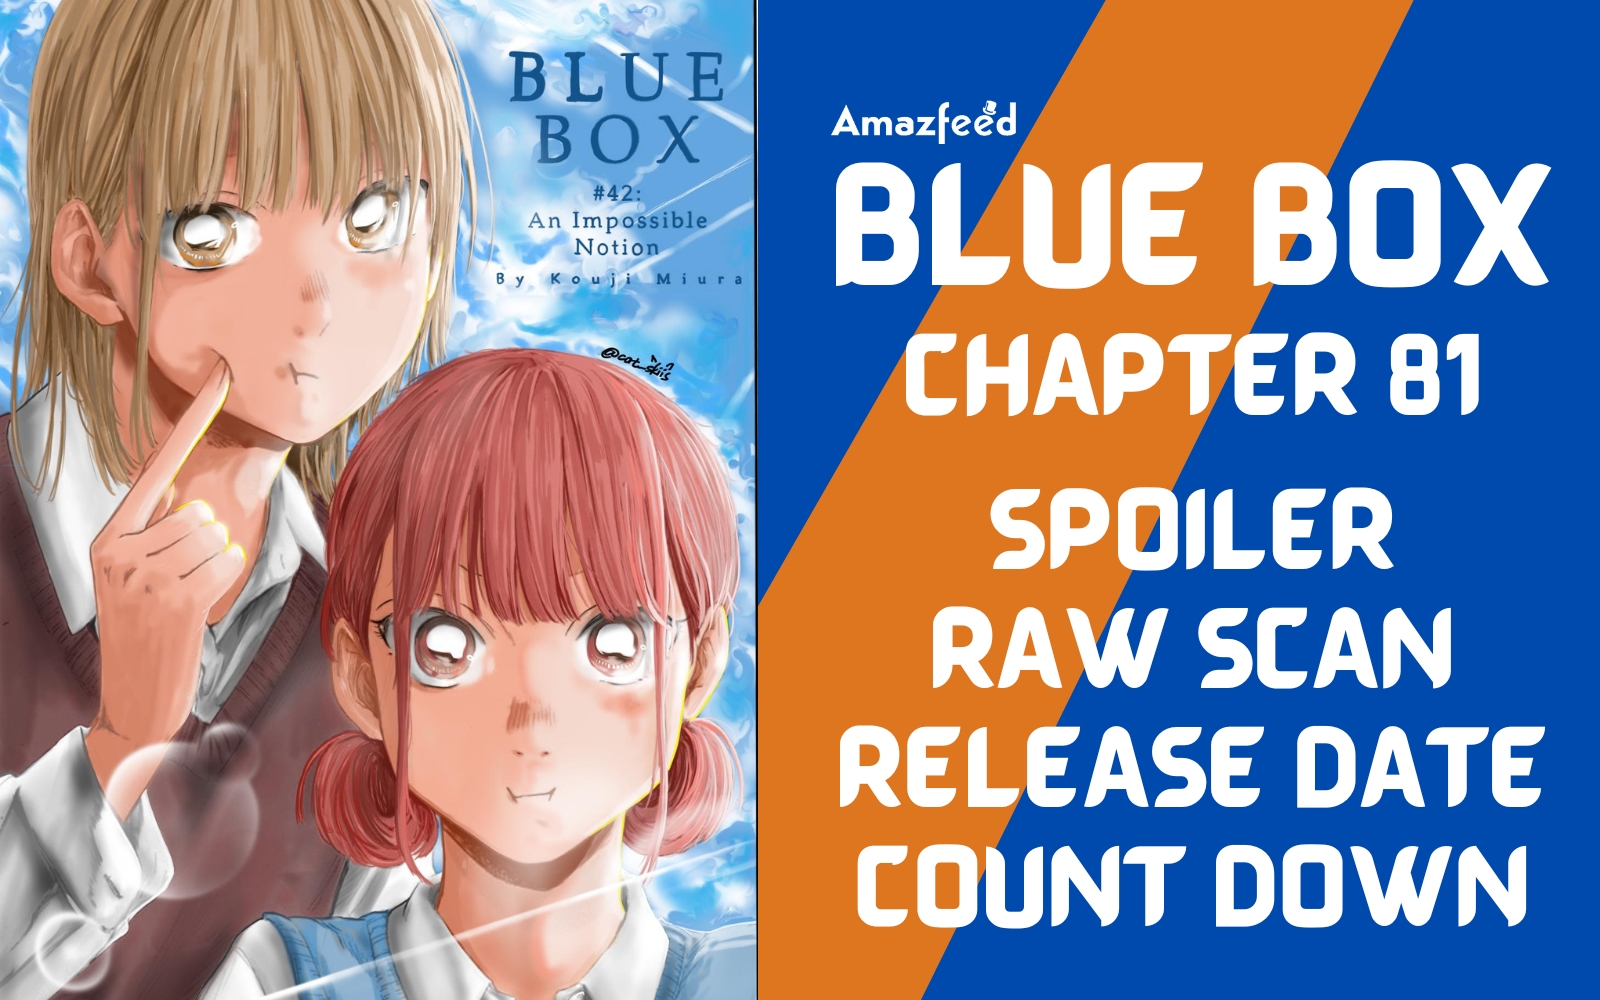 Blue Box Chapter 81 Spoiler, Raw Scan, Countdown, Release Date